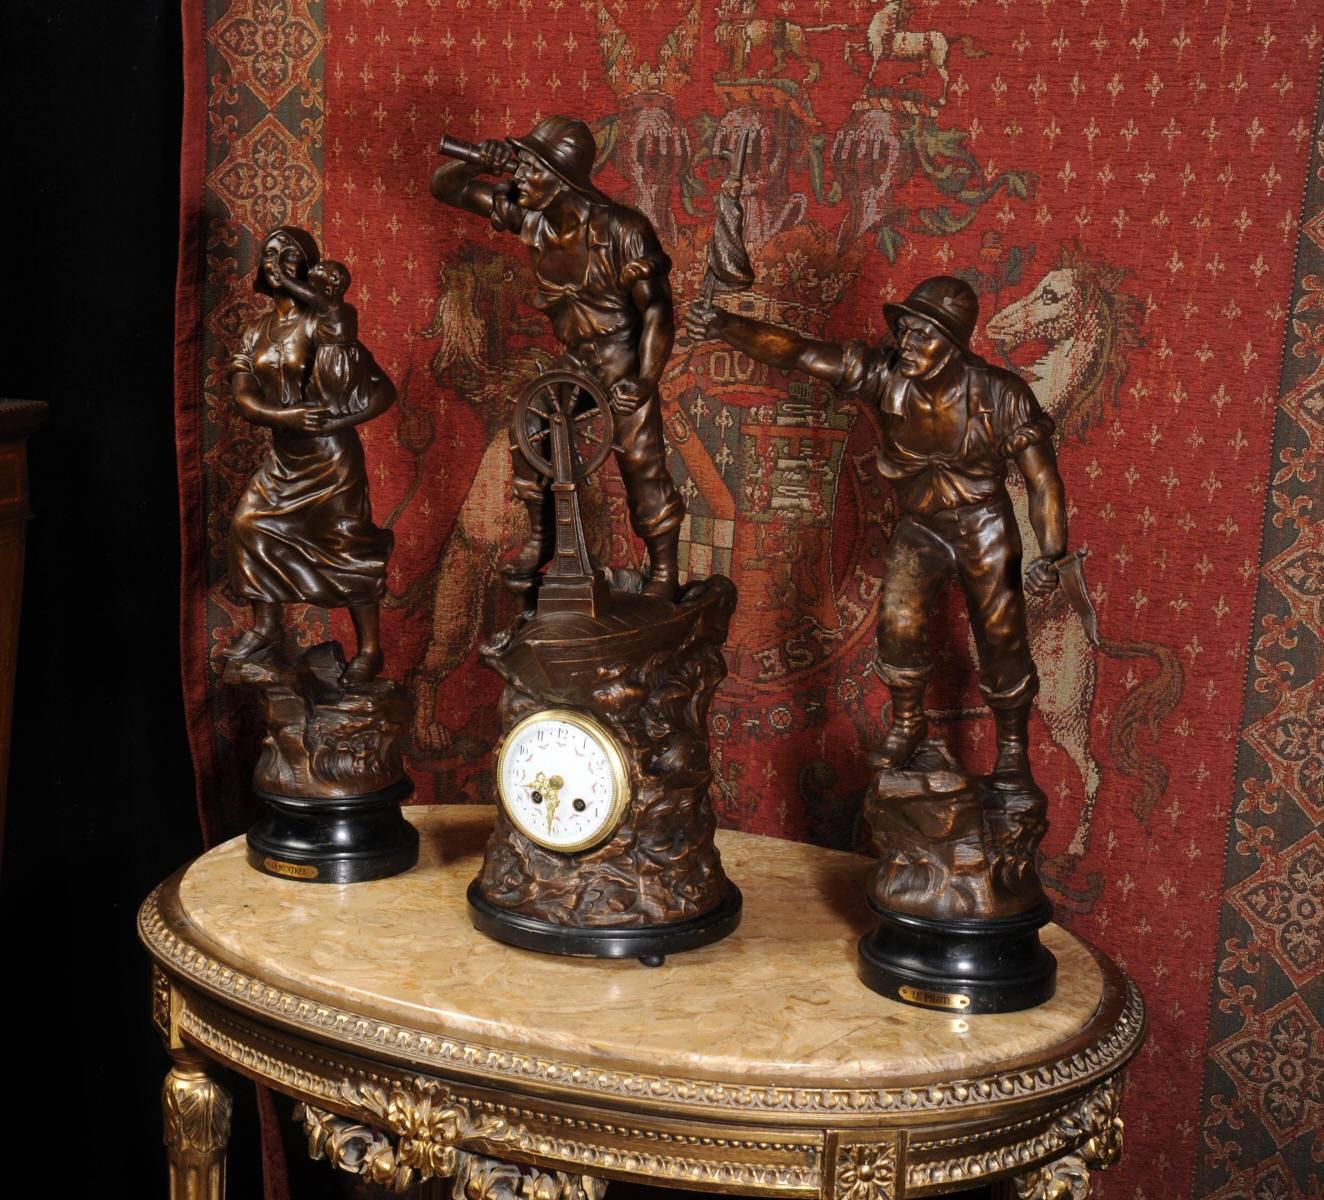 A large and stunning clockset of beautiful modelled bronzed patinated metal figures mounted on ebonised wooden bases, not marked but after Xavier Raphanel. The clockset is a brilliant depiction of adventure. A sailor at the helm of a small wooden